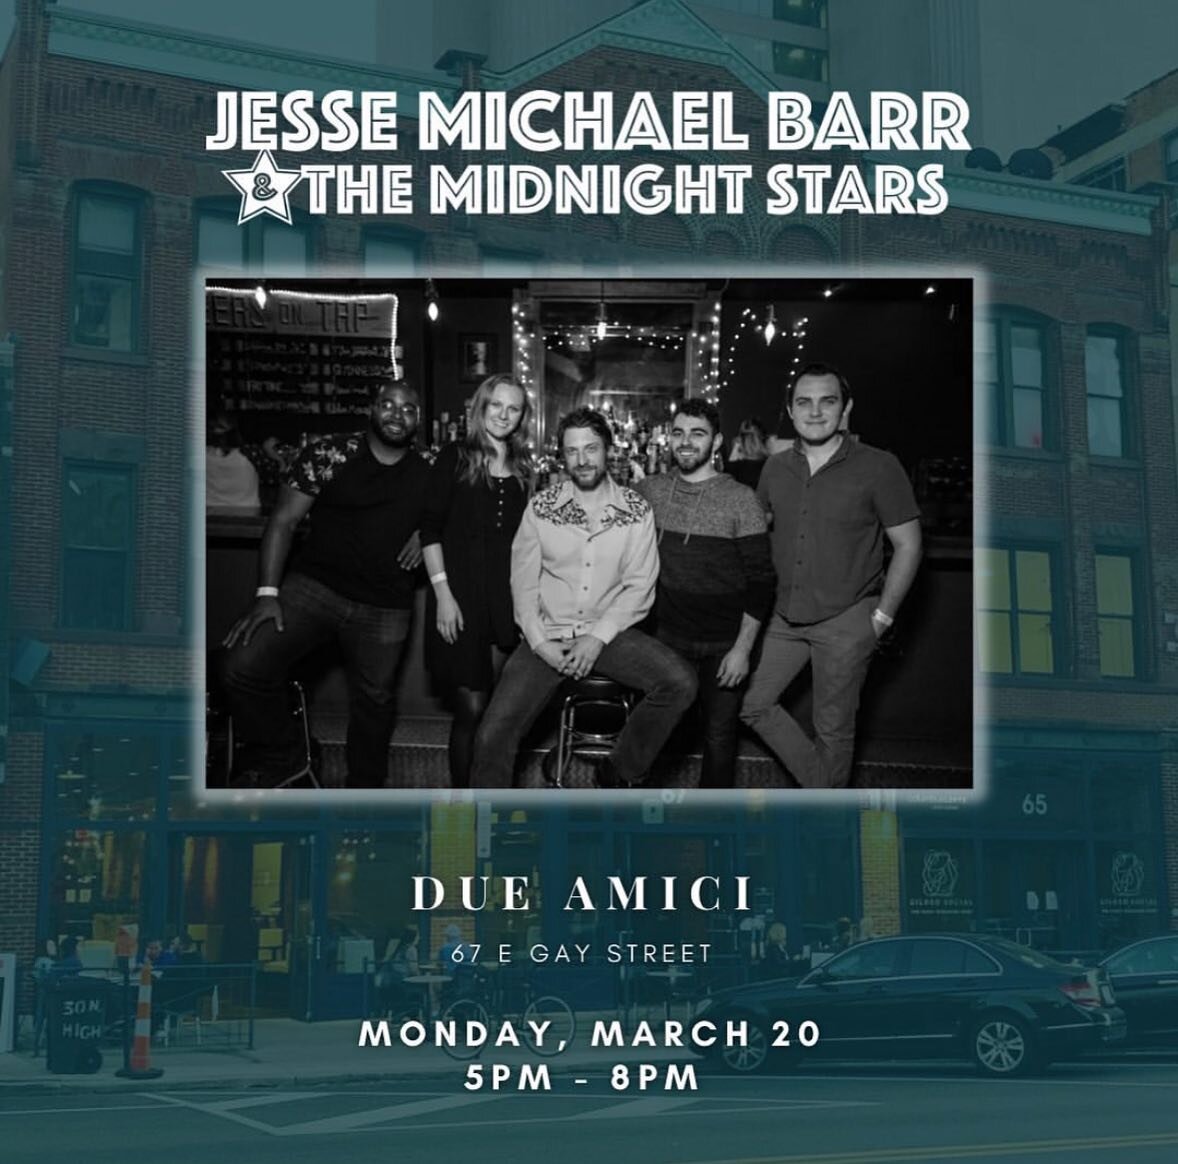 Live Music Mondays tonight with @jessembarr starts at 5pm! 

Happy Hour 3-6:30 with half off appetizers, pizzas, glasses of wine, beers, and house mules. 

Uncorked wine night with half off ALL bottles of wine. 

&bull;
&bull;
&bull;
&bull;
&bull;
#d